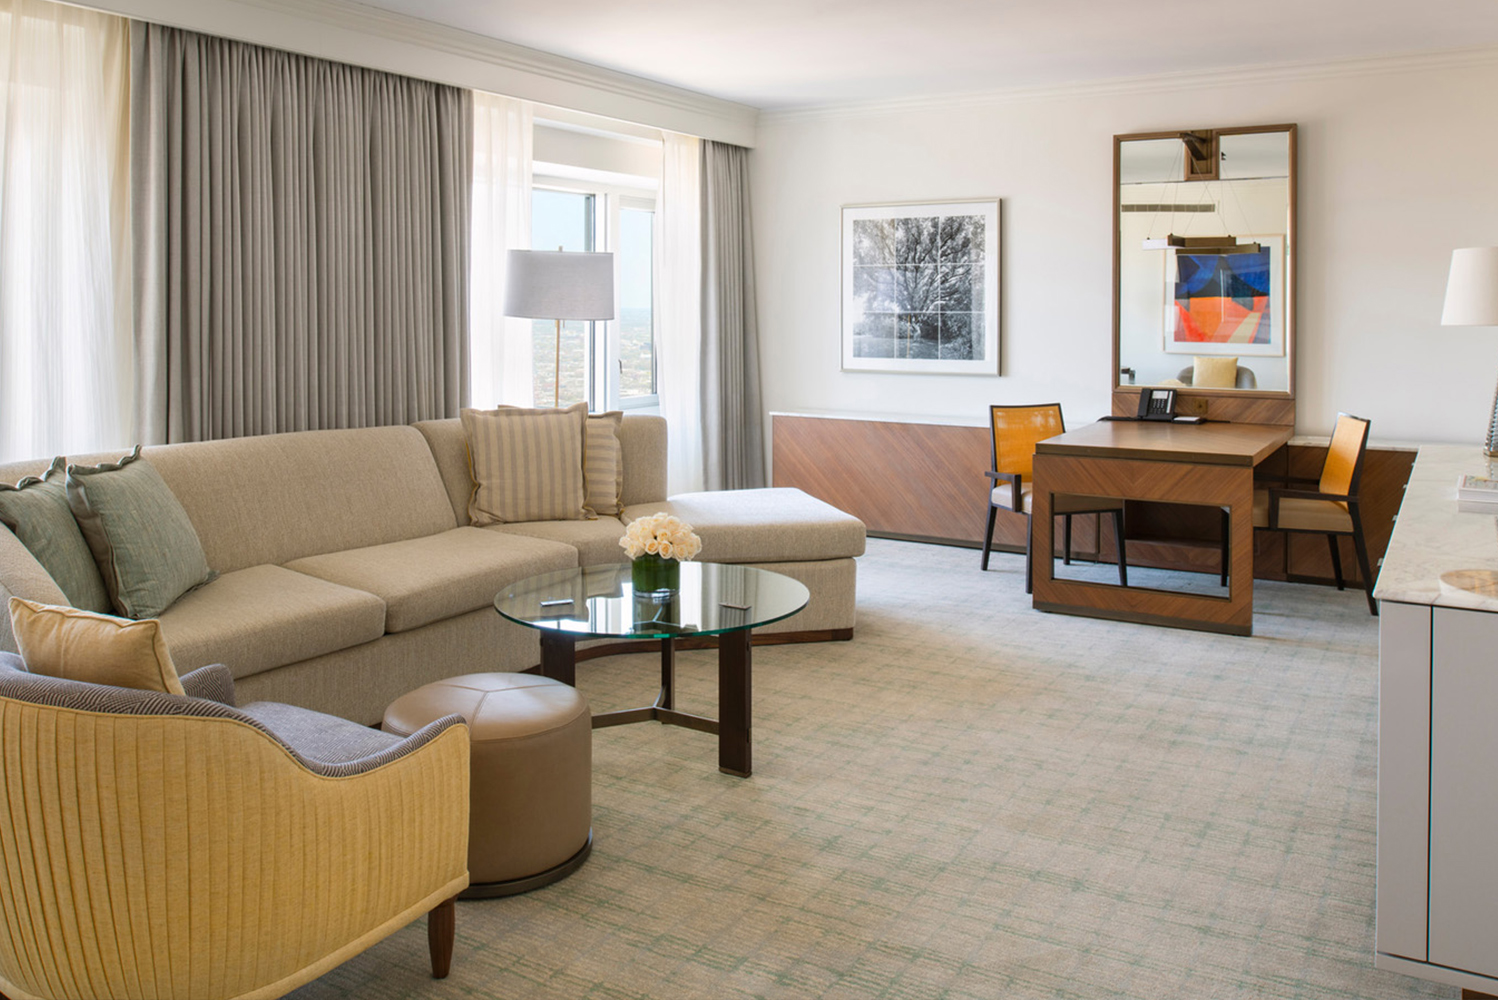 Four Seasons Hotel Chicago the property with the highest rooms and suites in Chicago completed the renovation of its one-be